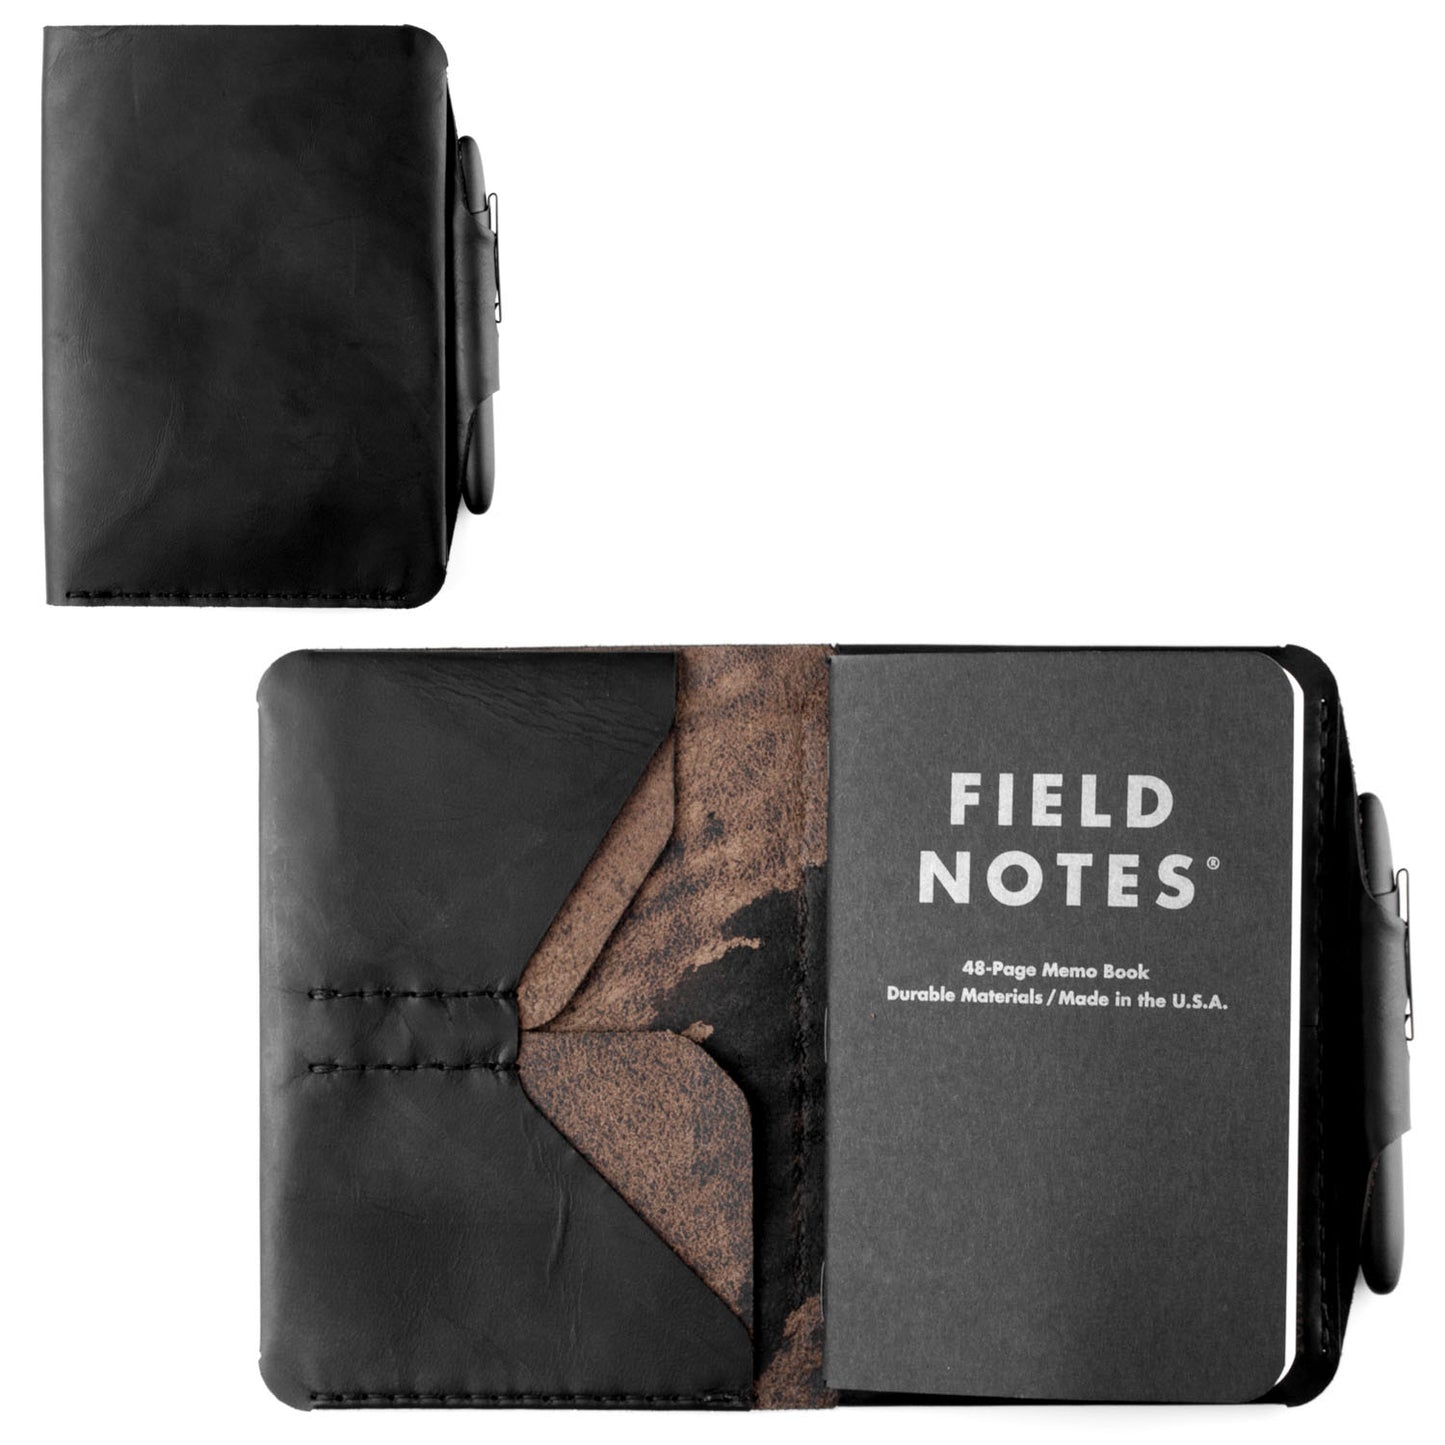 The Field Rep Wallet